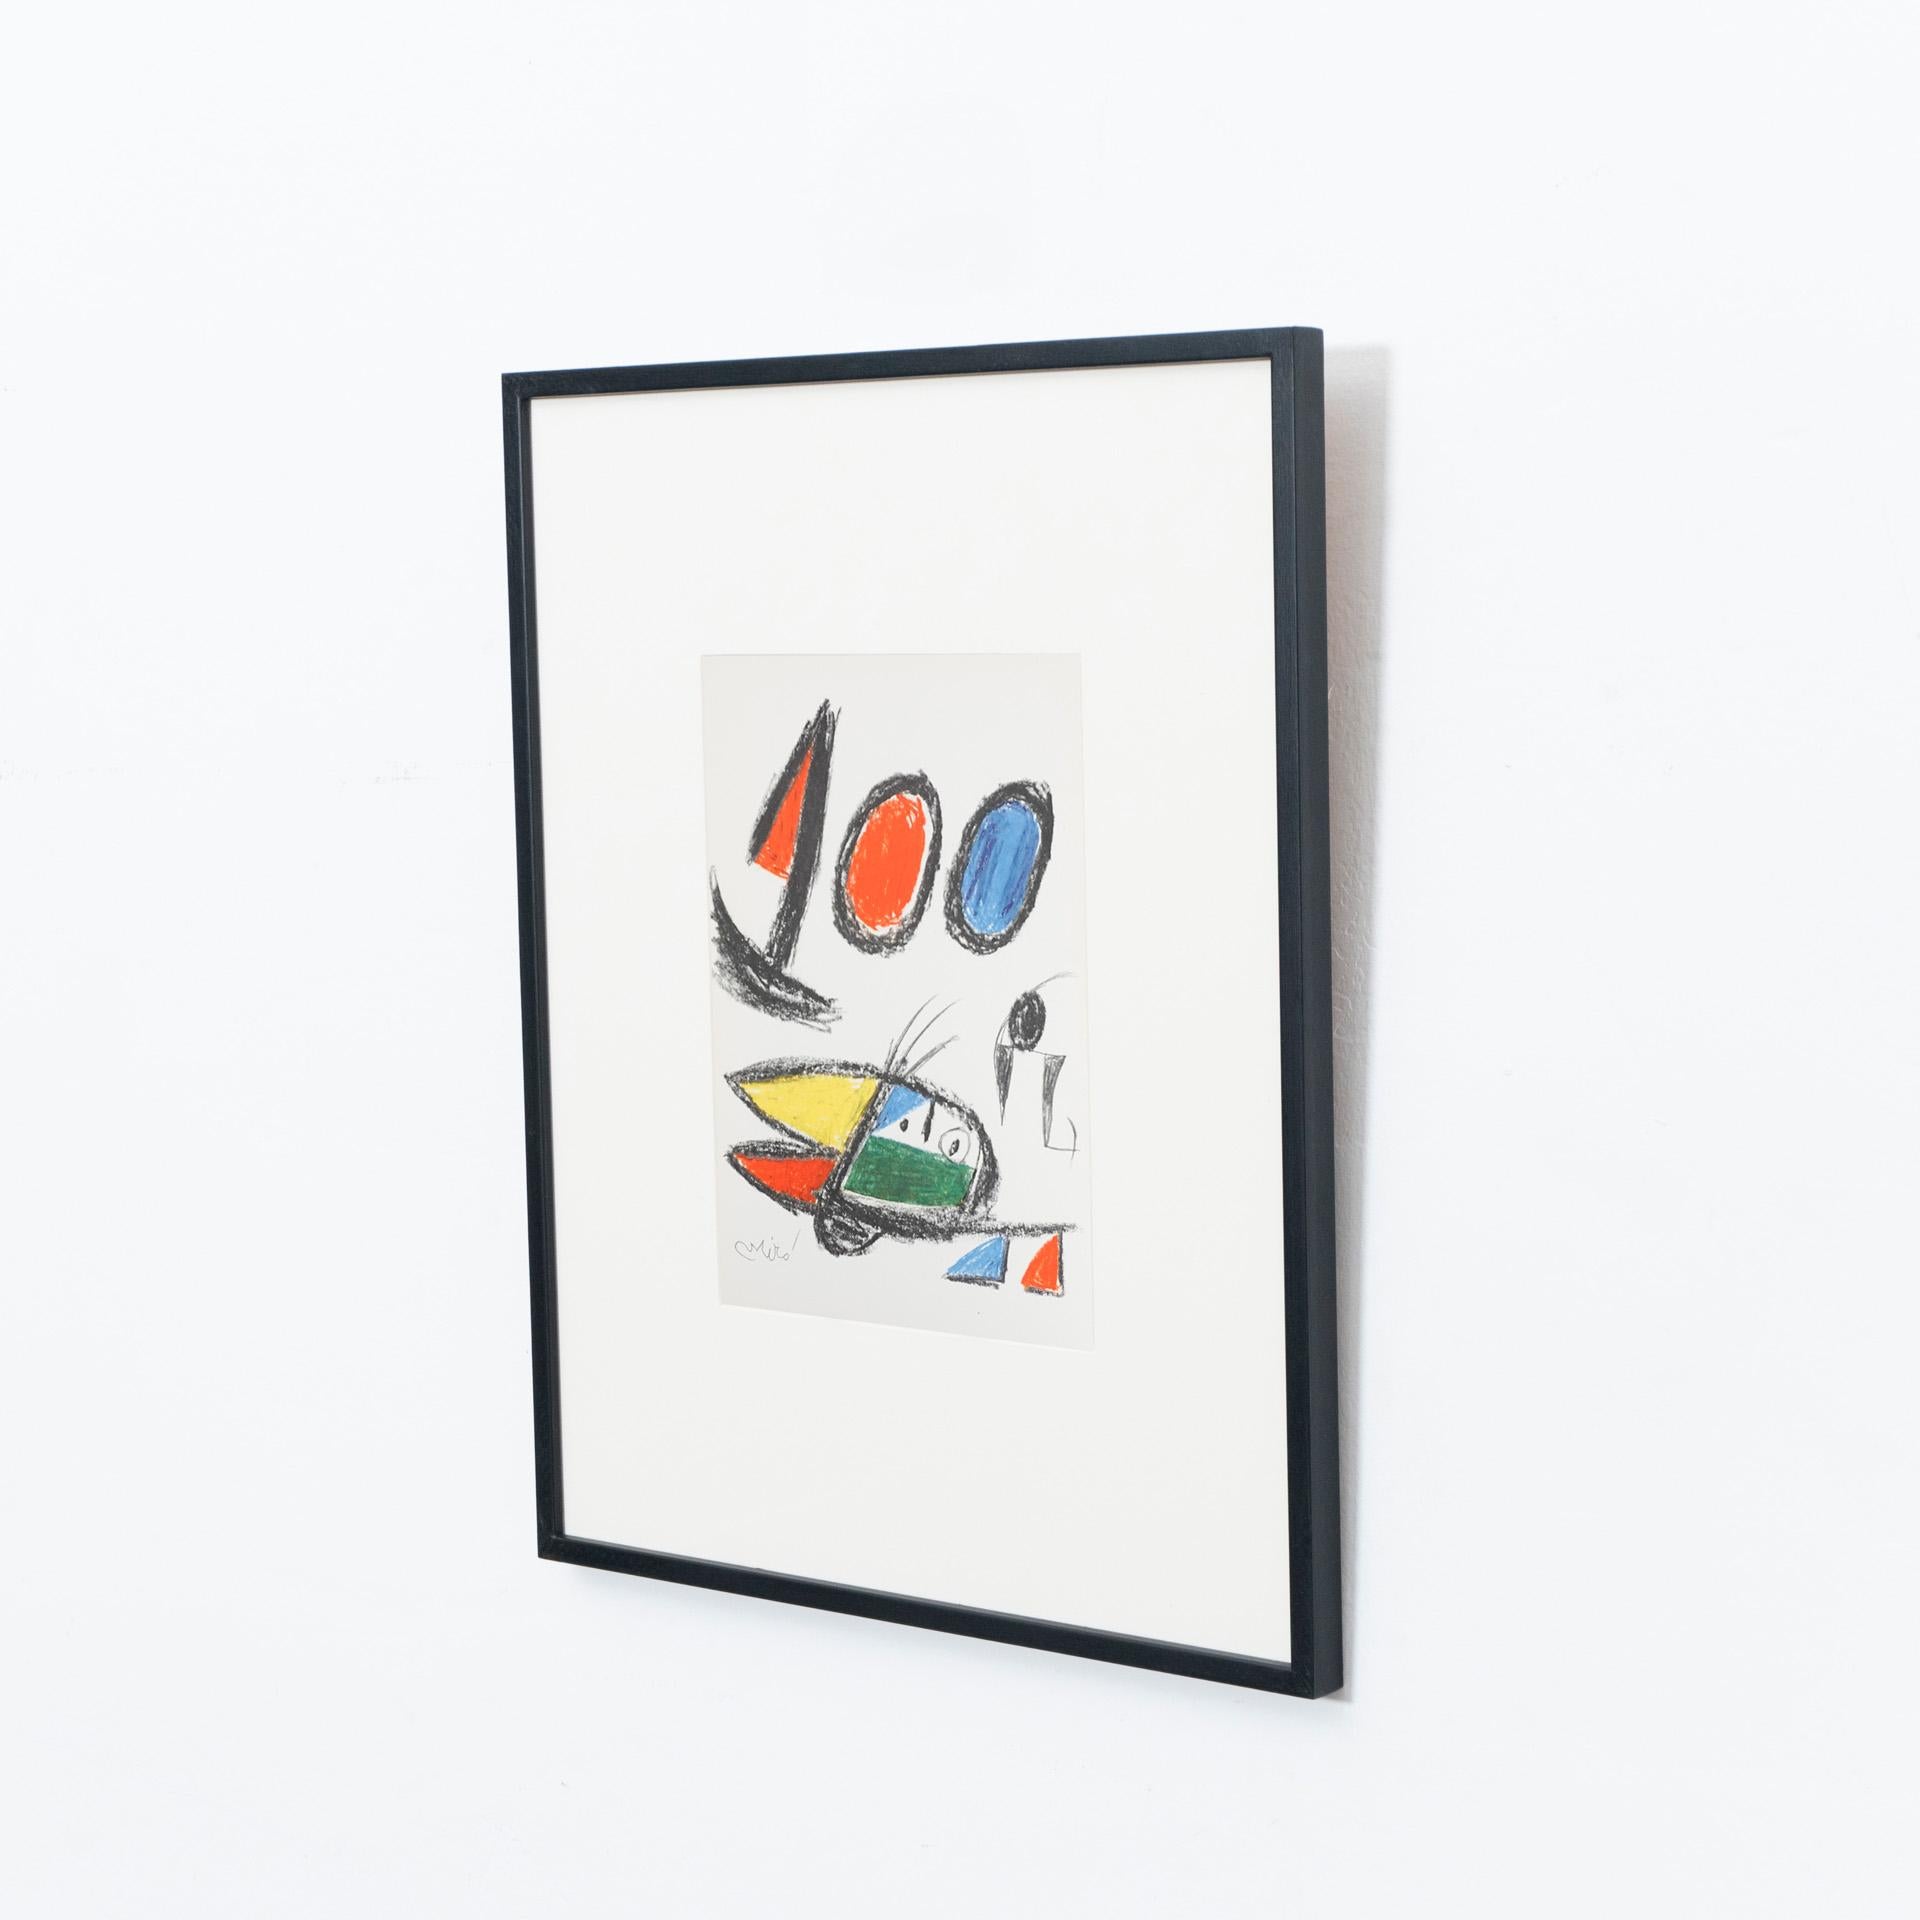 European Miró, Limited Edition Photolithography, circa 1970 For Sale